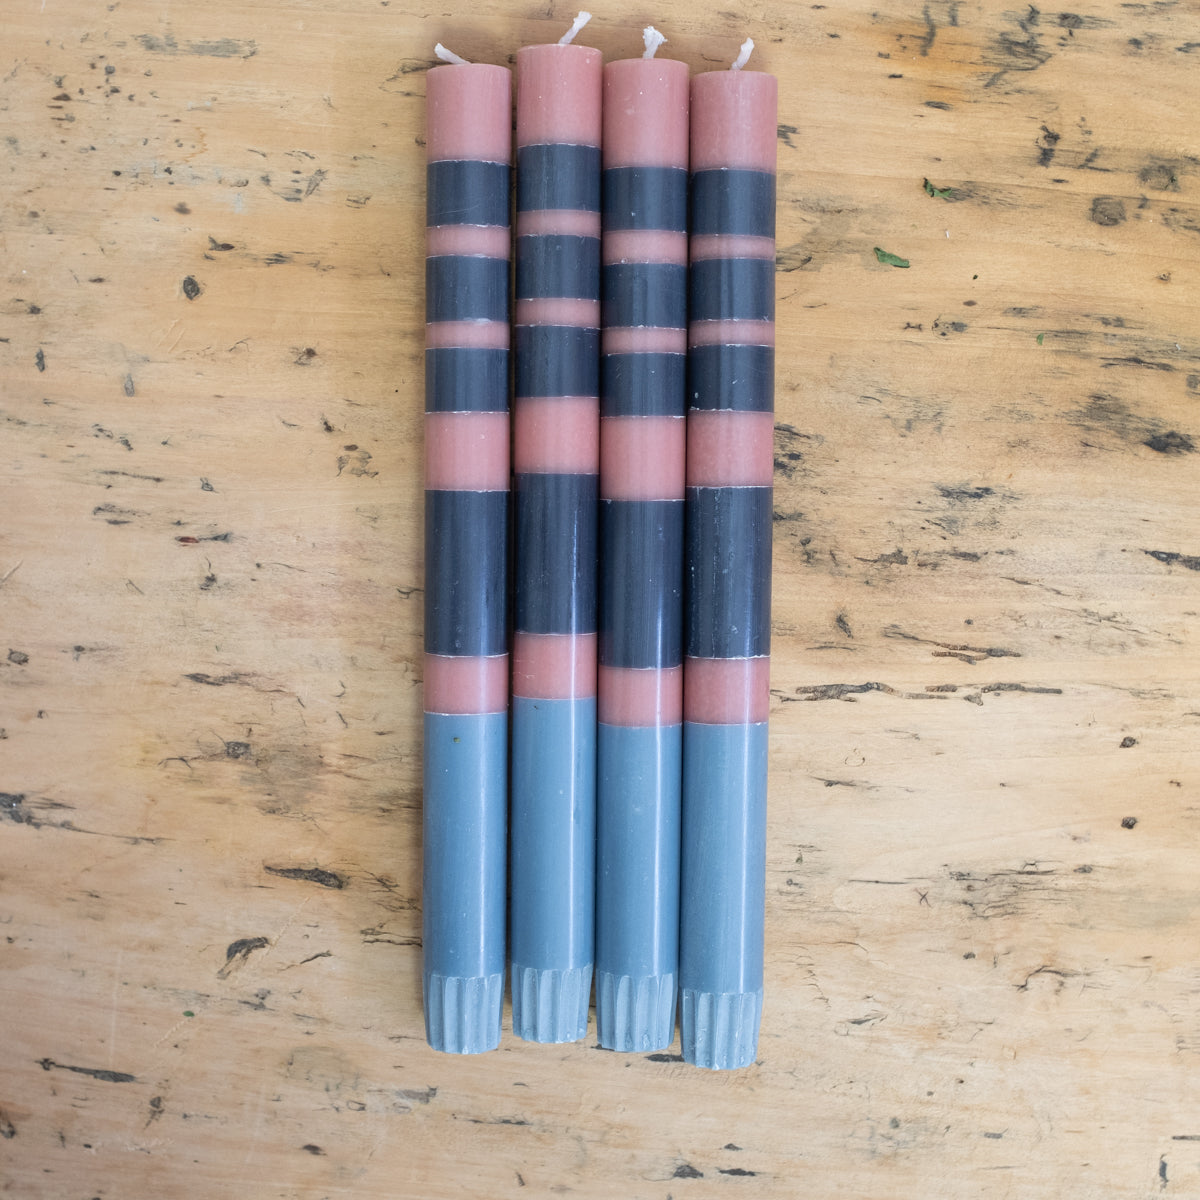 blue and pink striped candles